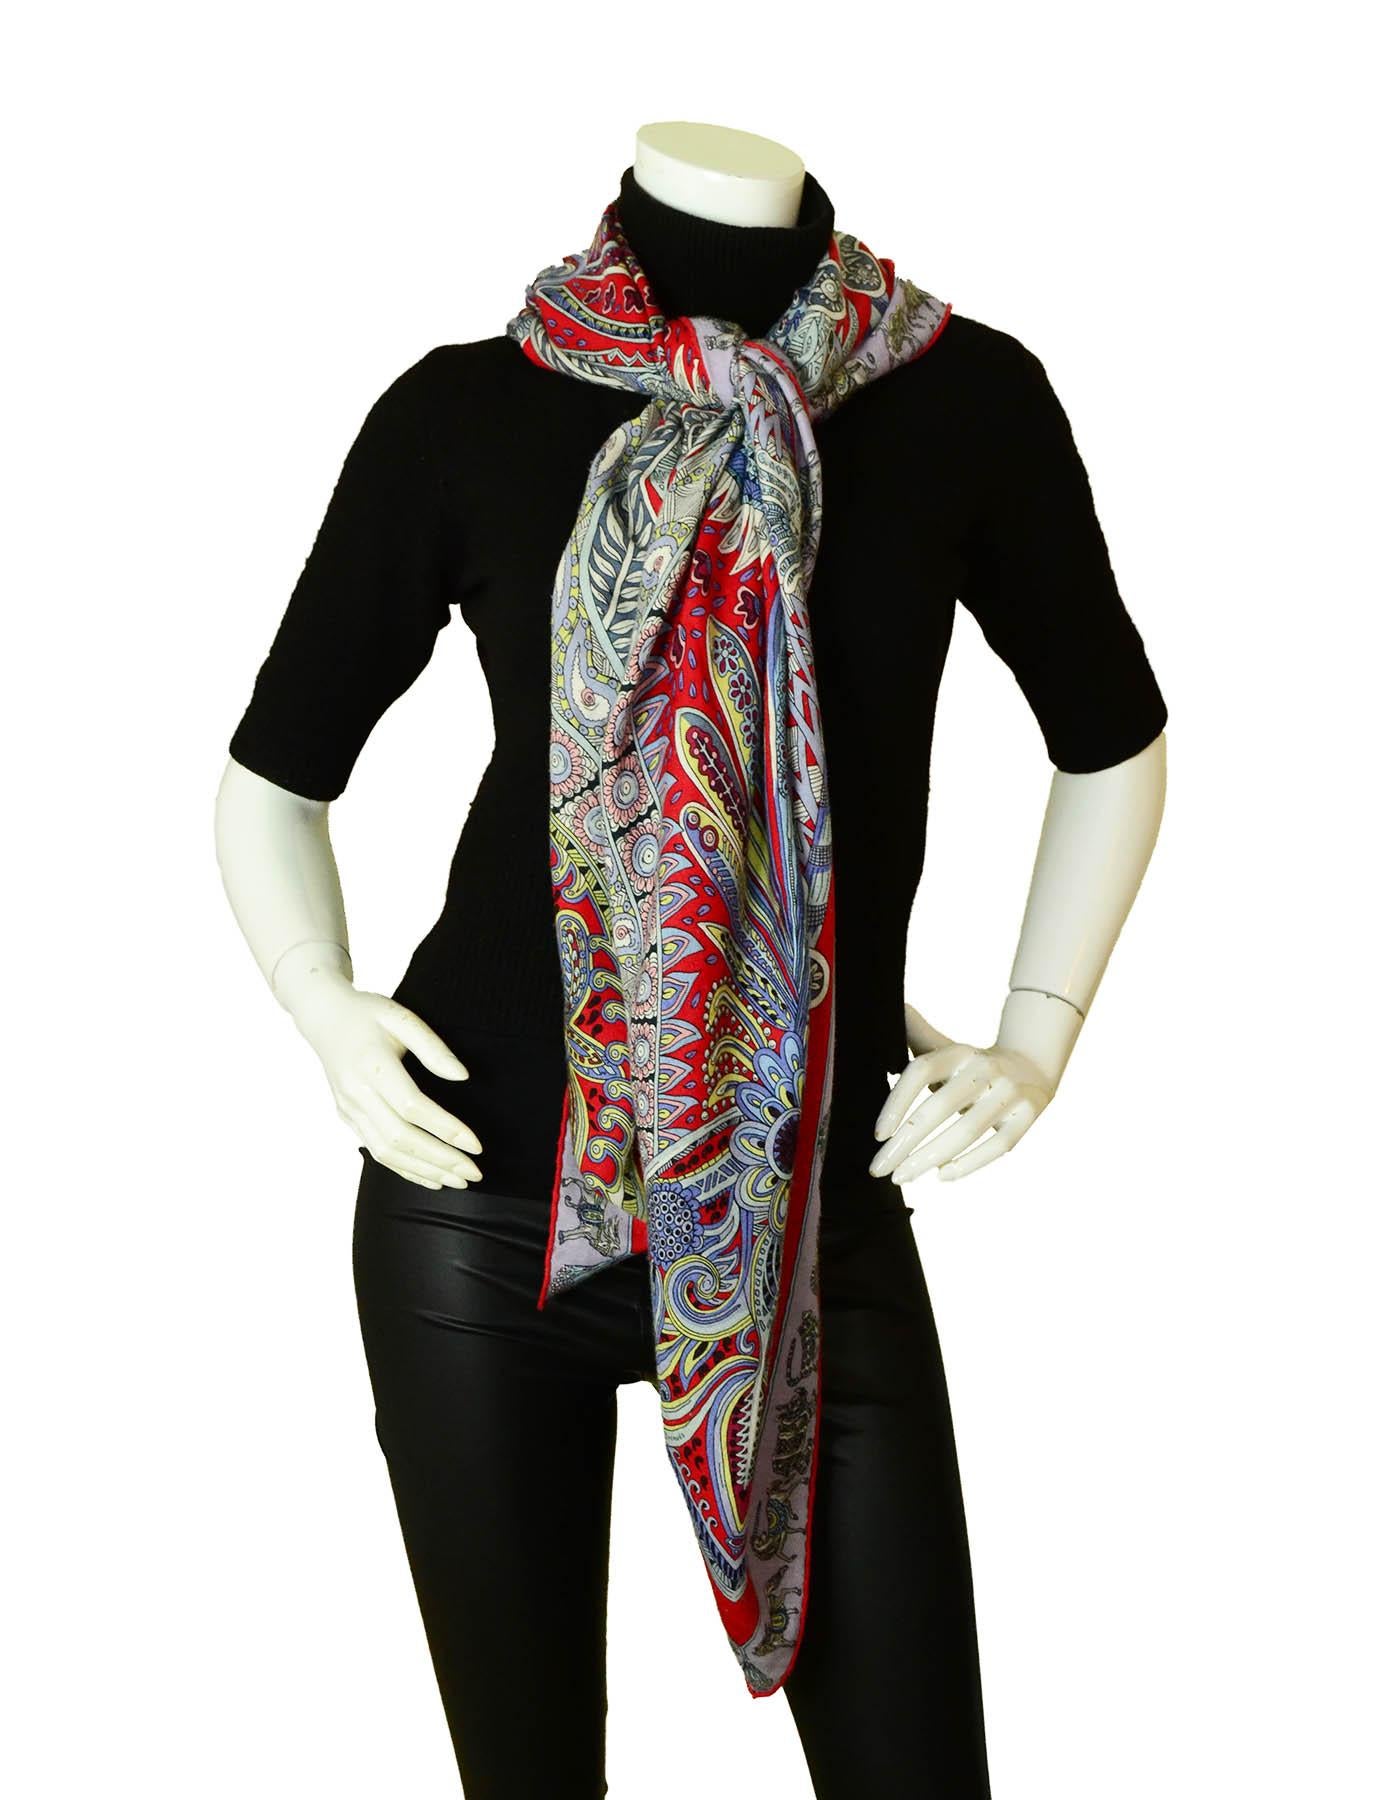 Hermes Red/Lilac/Multicolor Le Jardin de la Maharani Silk & Cashmere 140 Shawl Scarf designed by Annie Faivre

Made In: France
Year of Production: circa 2016 Fall/Winter
Color: Rouge / Lilas / Jaune Soufre
Materials: 70% cashmere, 30% silk
Overall